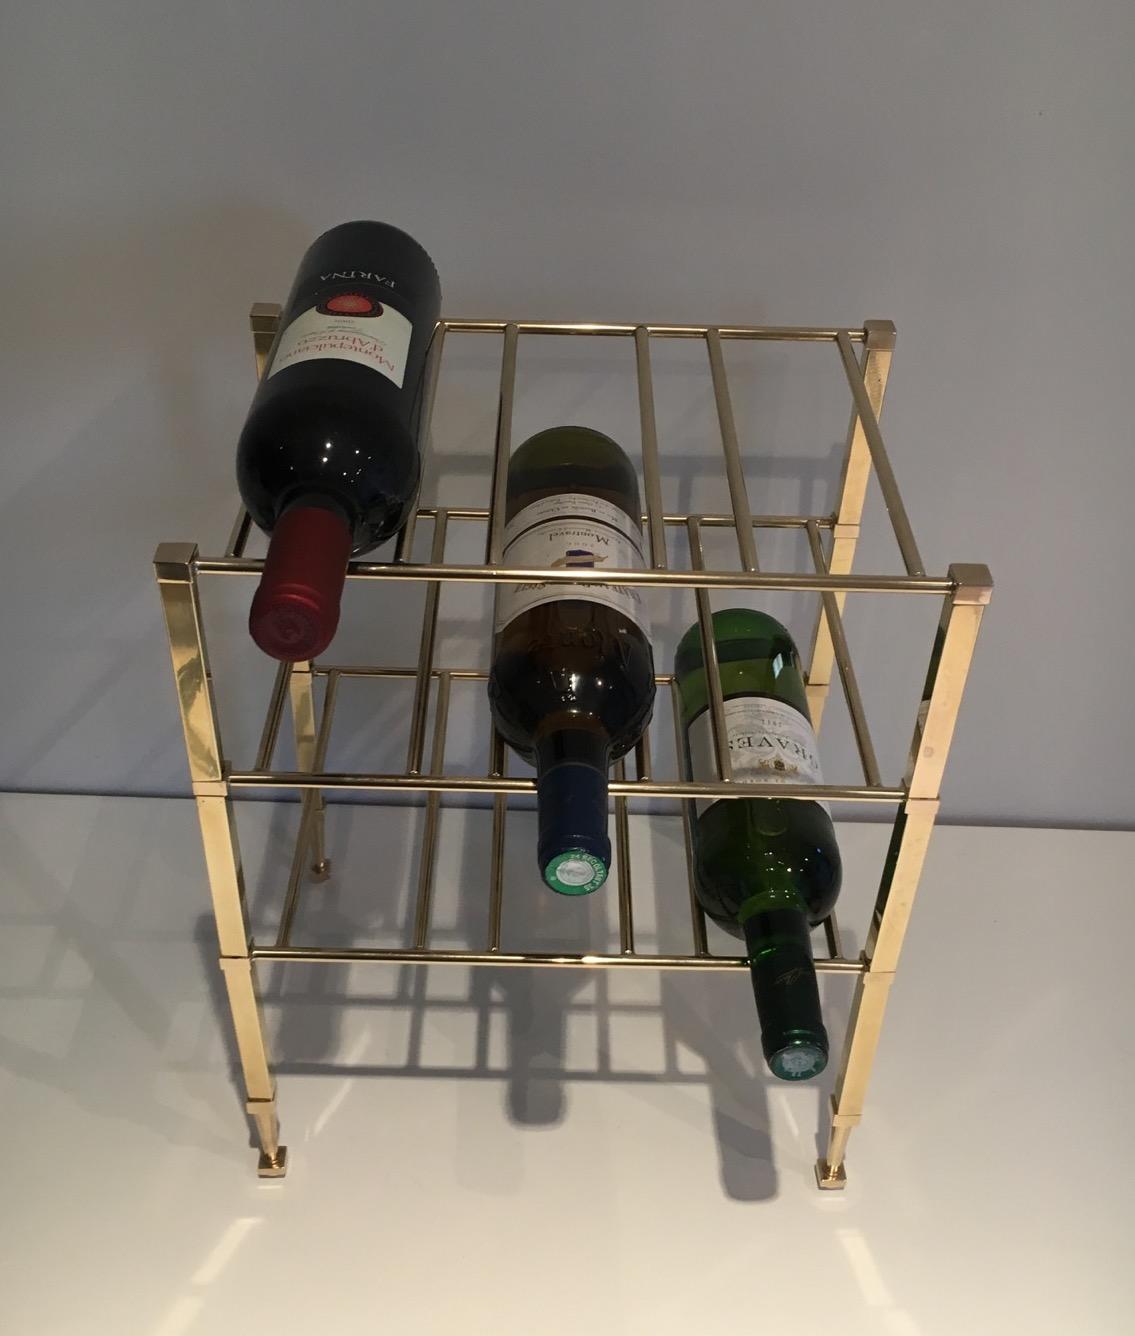 This elegant neoclassical wine bottles rack is made of brass. It is attributed to the famous French designer Maison Jansen. Circa 1940.